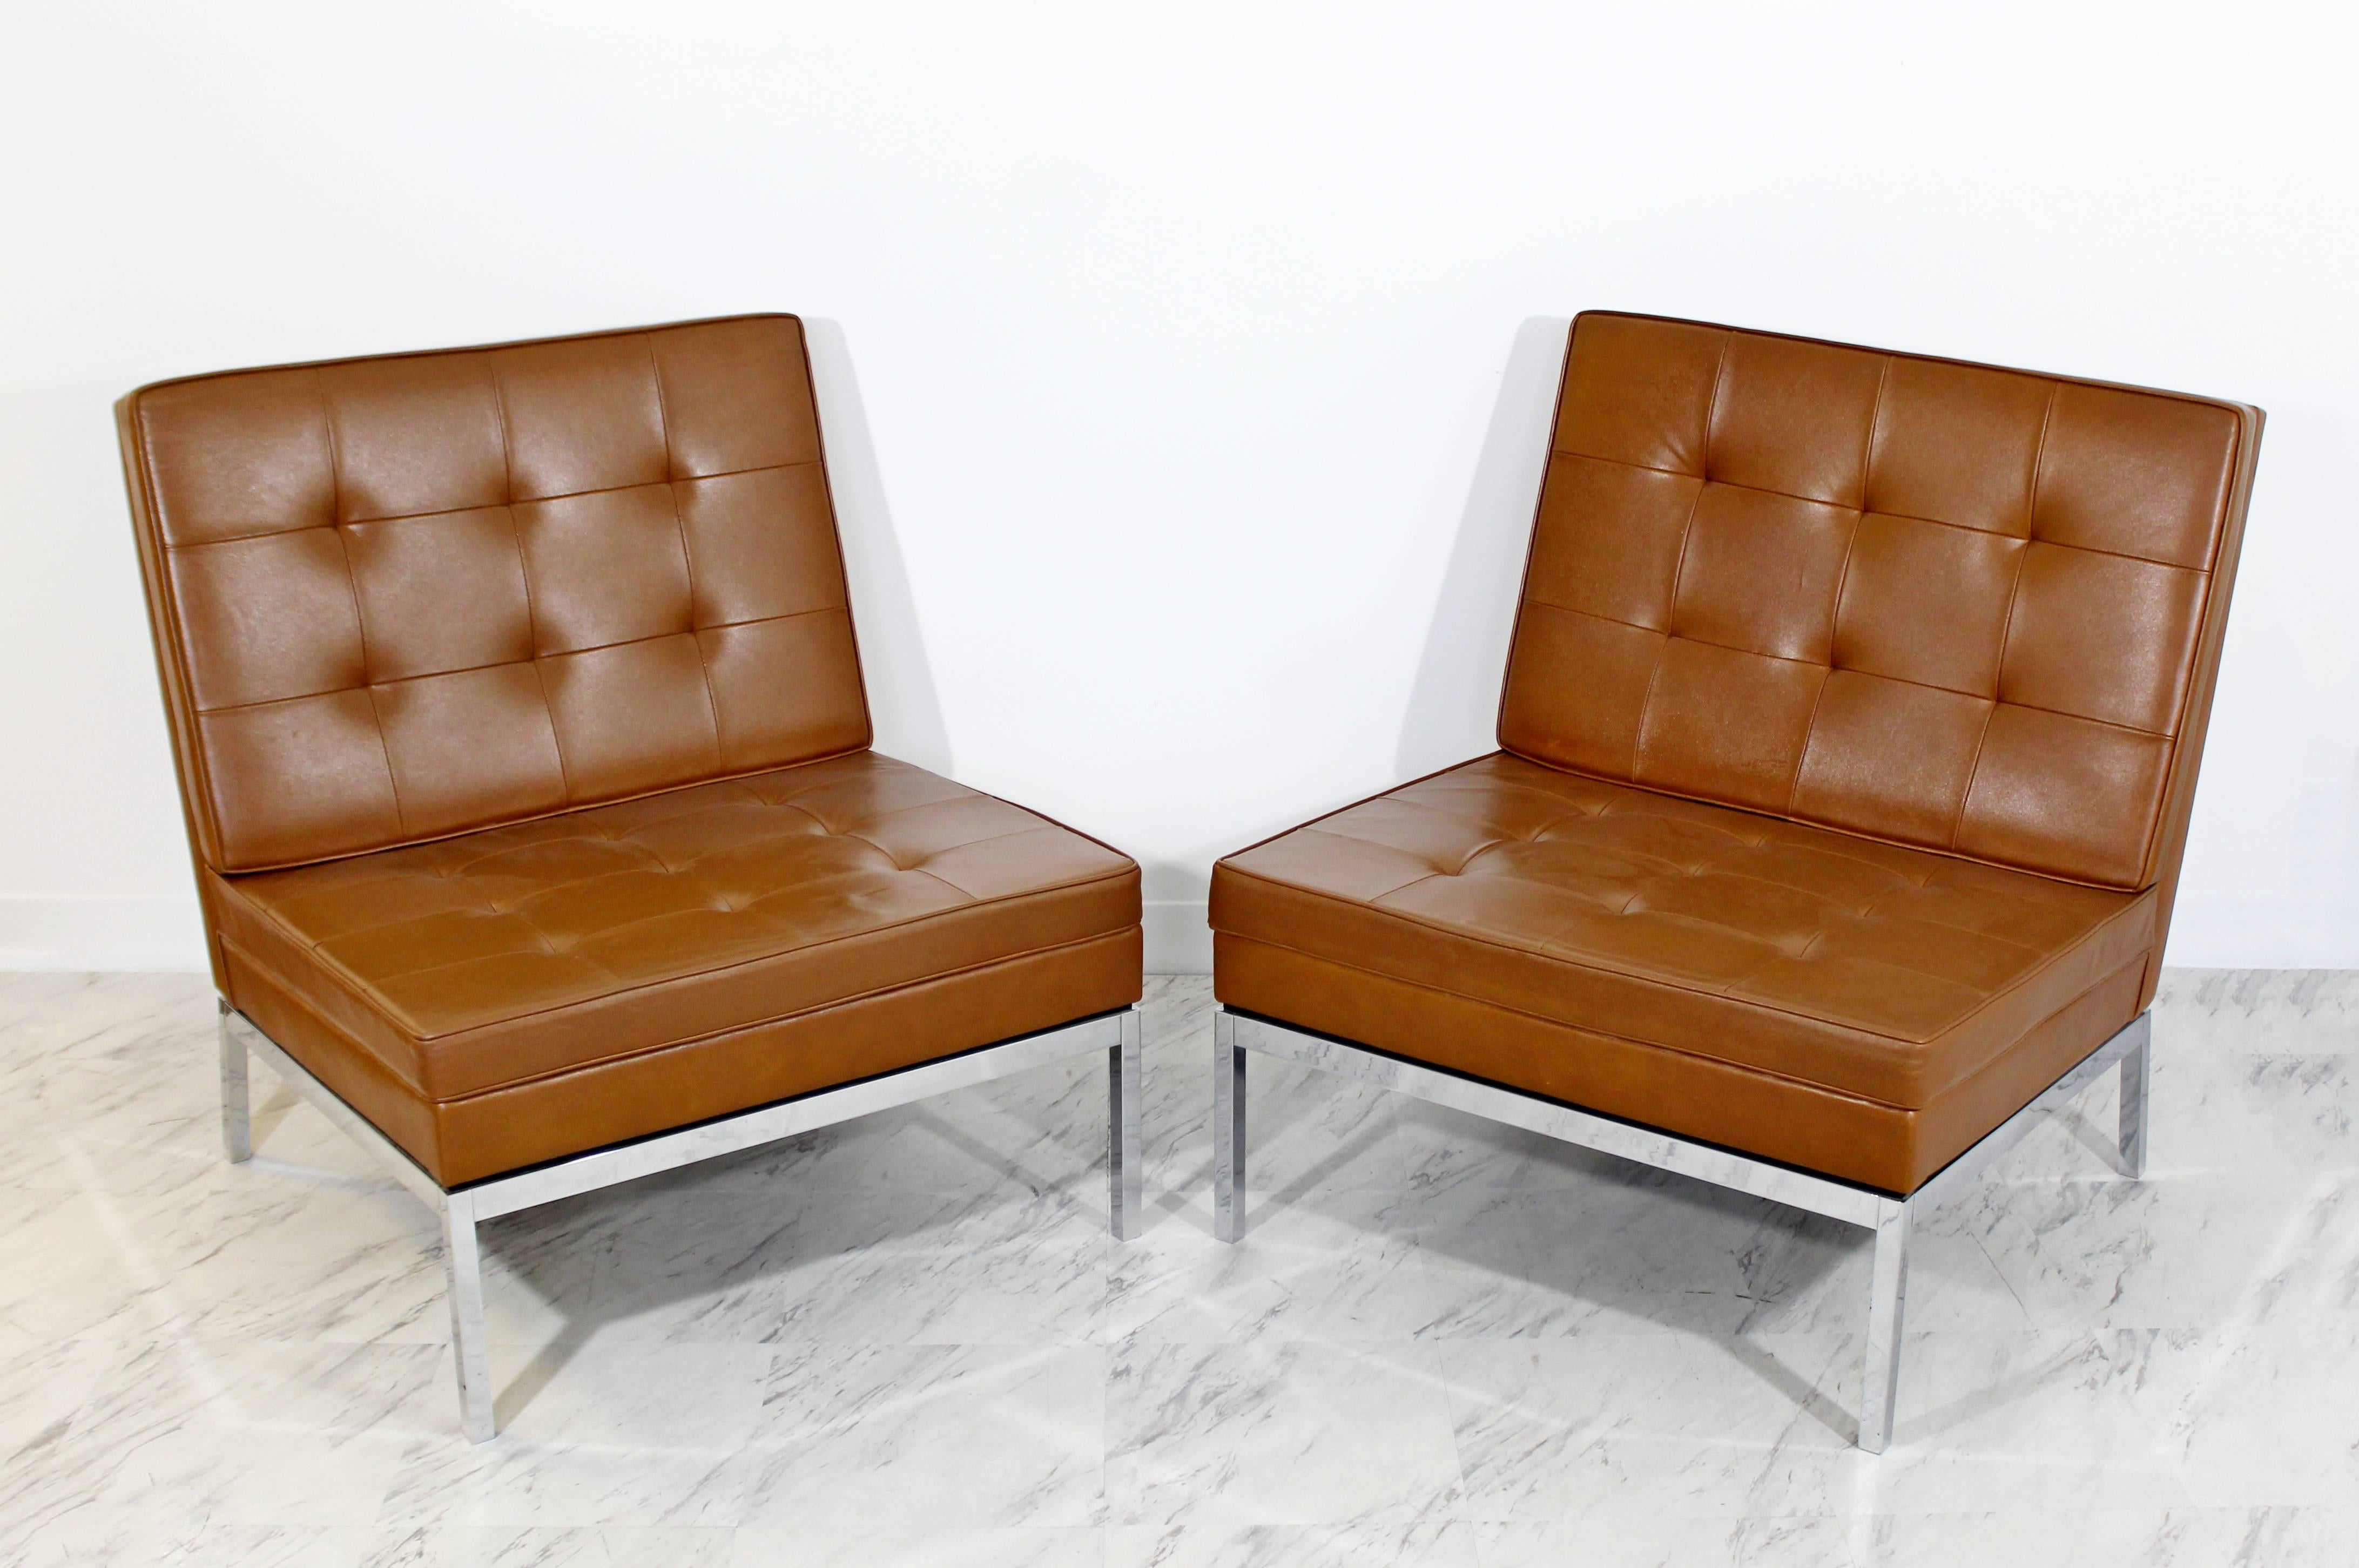 For your consideration is a phenomenal pair of chrome and brown leather slipper chairs, model #65, by Florence Knoll, circa 1960s. In excellent condition. The dimensions of each are 28